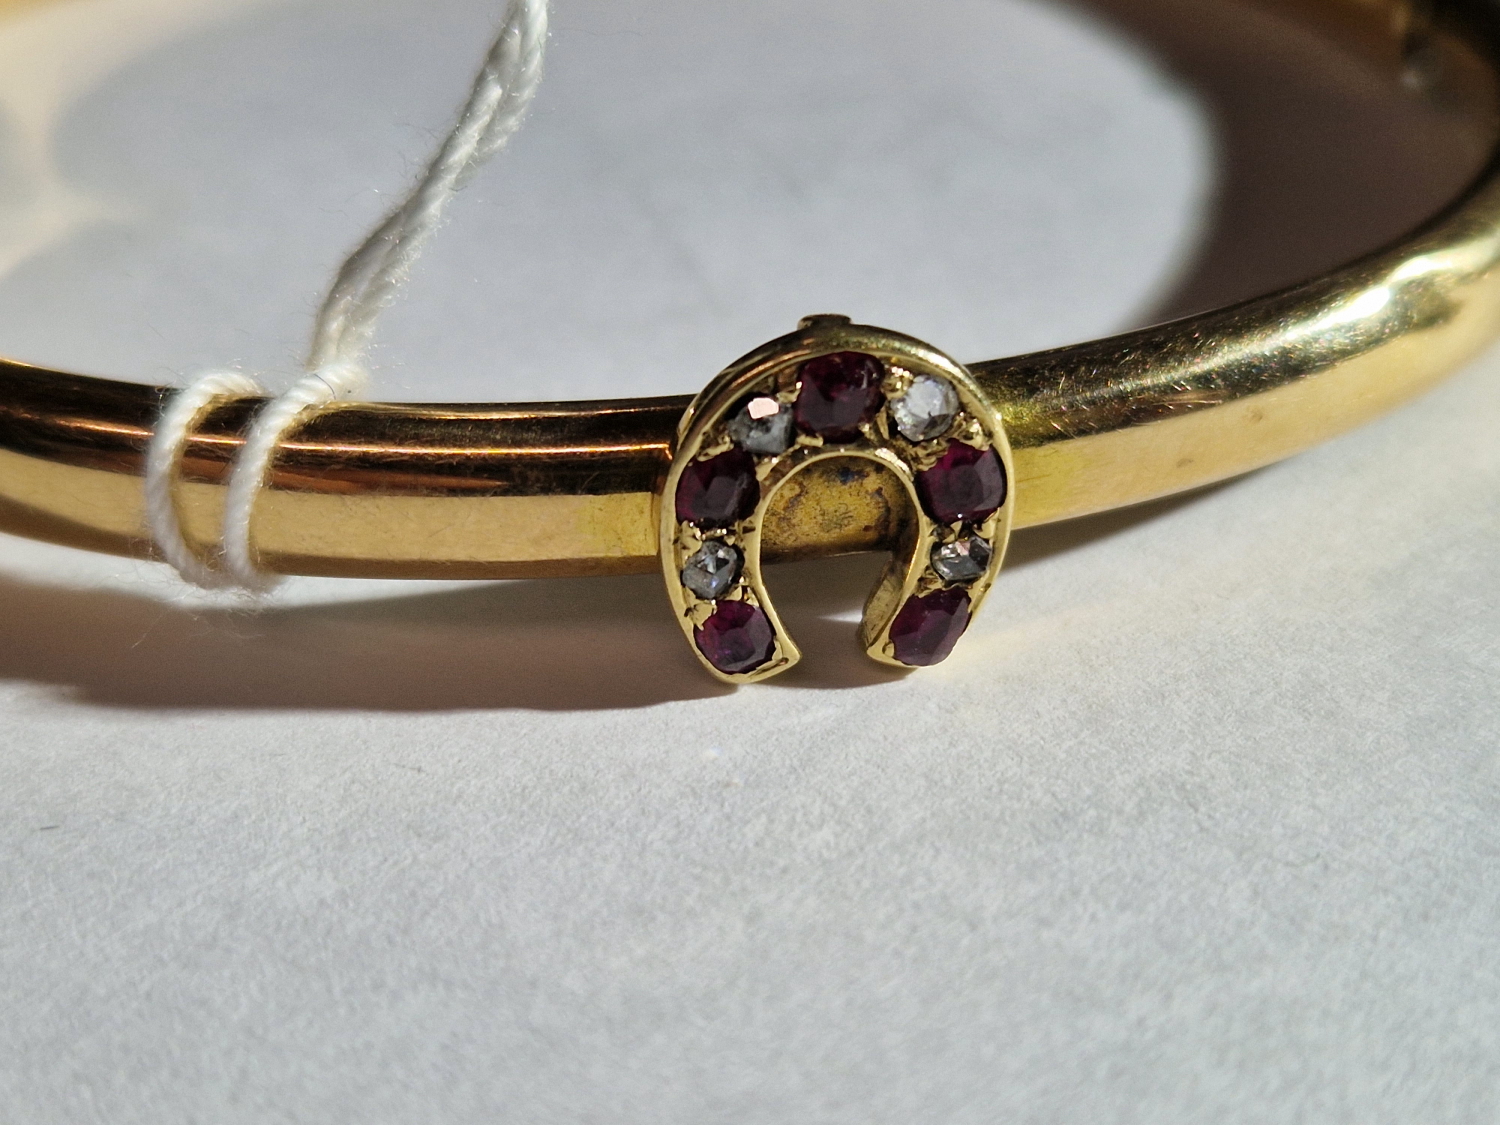 AN ANTIQUE BANGLE SET WITH A RUBY AND DIAMOND HORSESHOE. THE HINGED BANGLE UNHALLMARKED, ASSESSED AS - Image 8 of 8